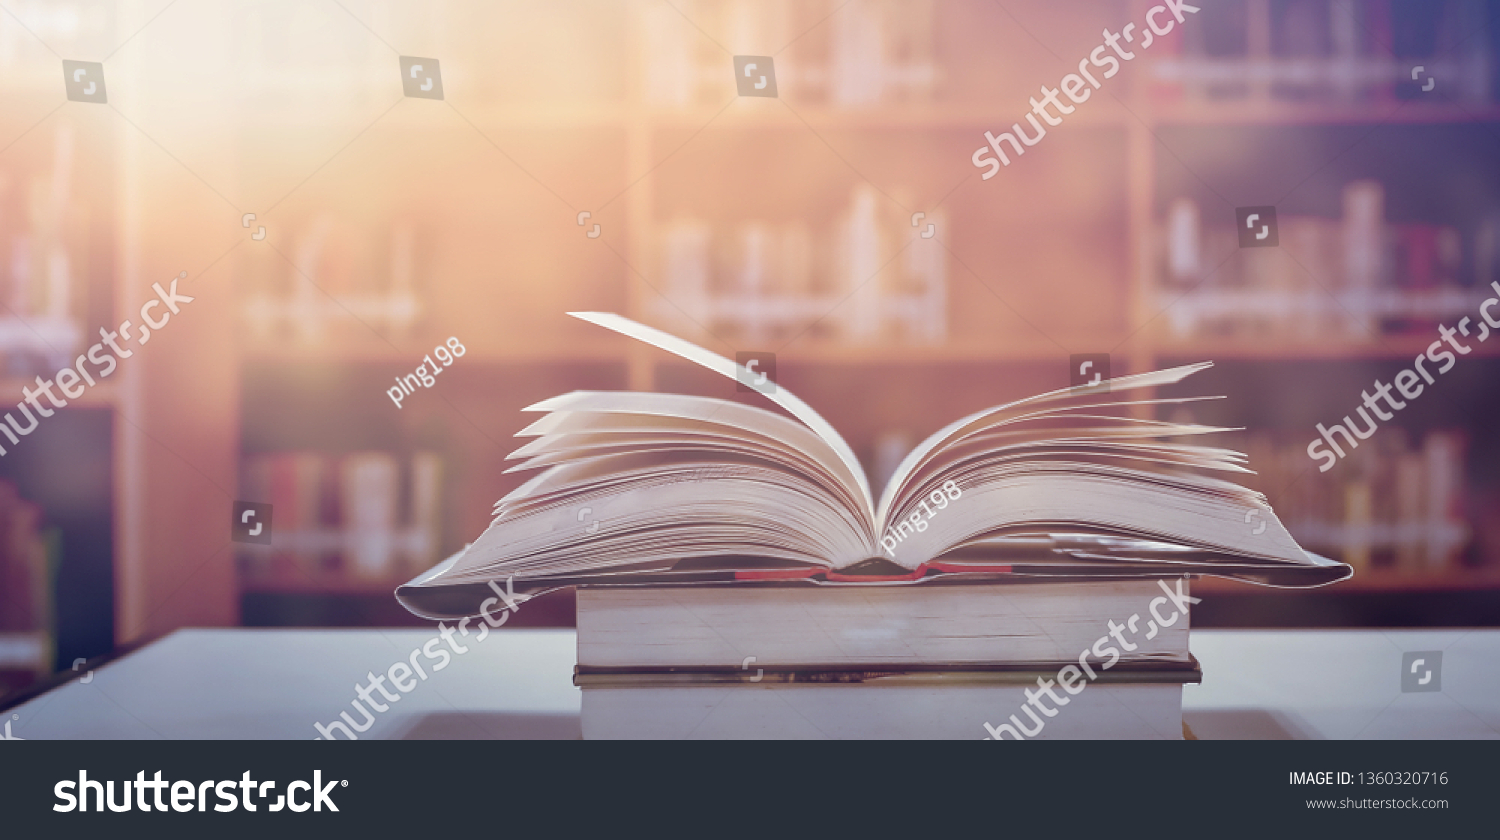 Book in library with old open textbook, stack piles of literature text archive on reading desk, and aisle of bookshelves in school study class room background for academic education learning concept #1360320716